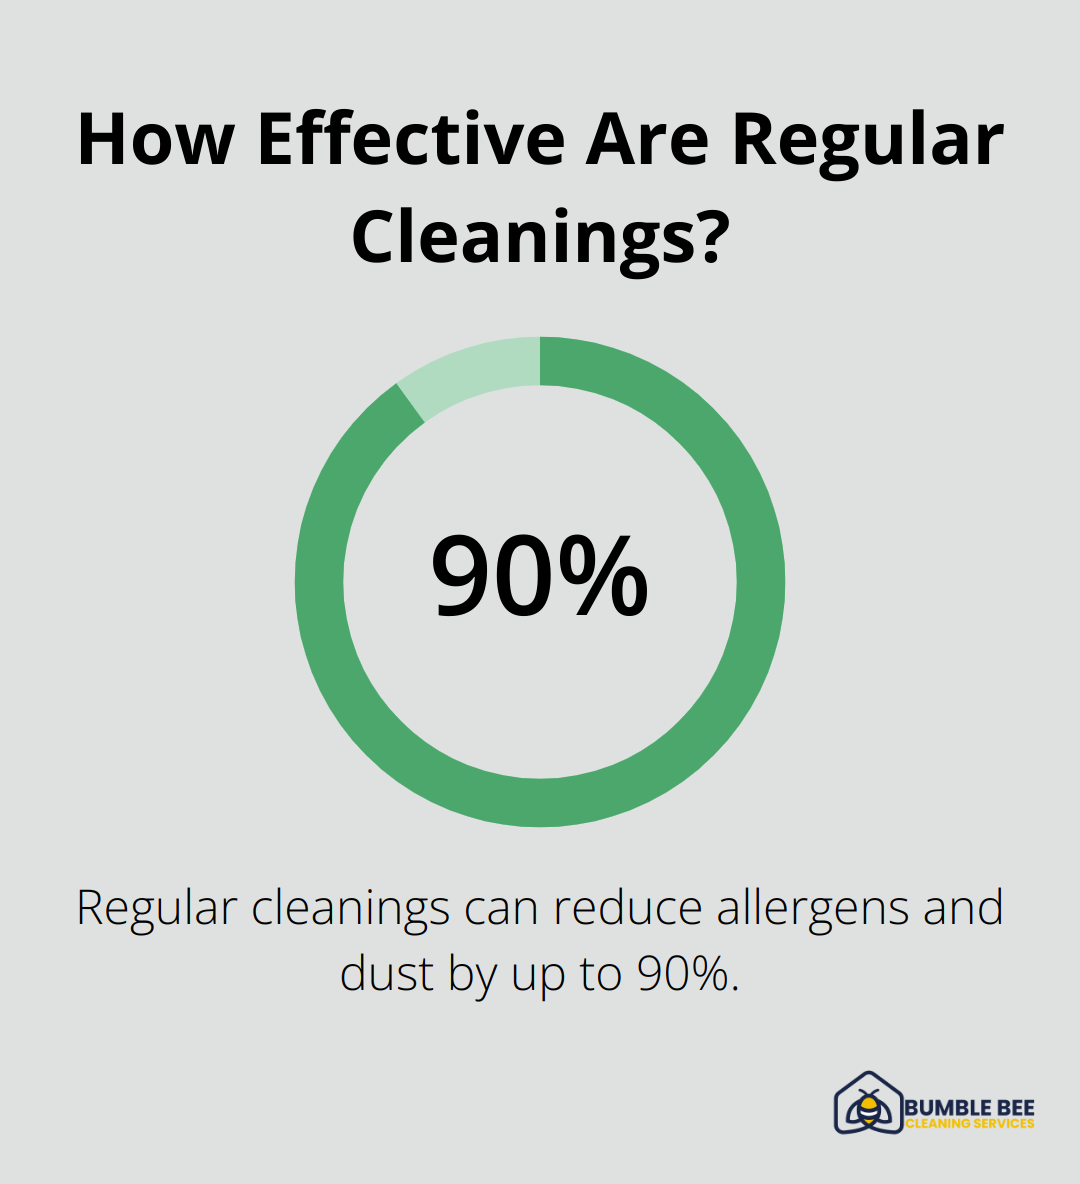 How Effective Are Regular Cleanings?